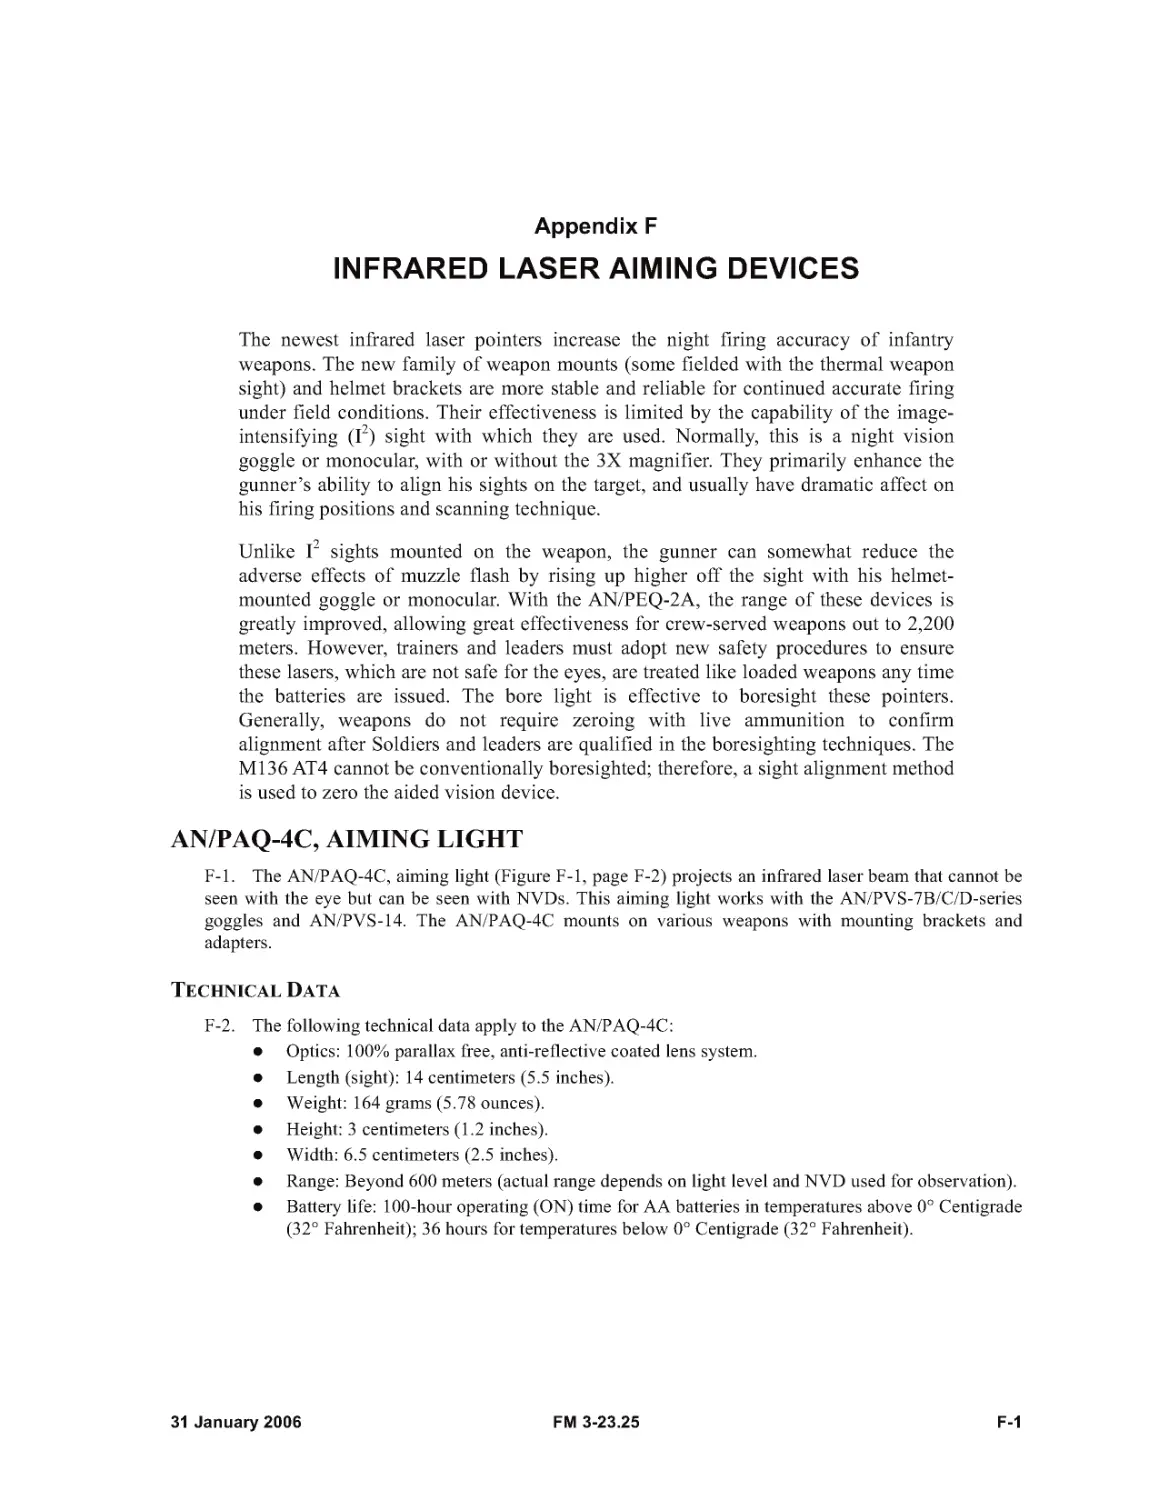 Appendix F - INFRARED LASER AIMING DEVICES